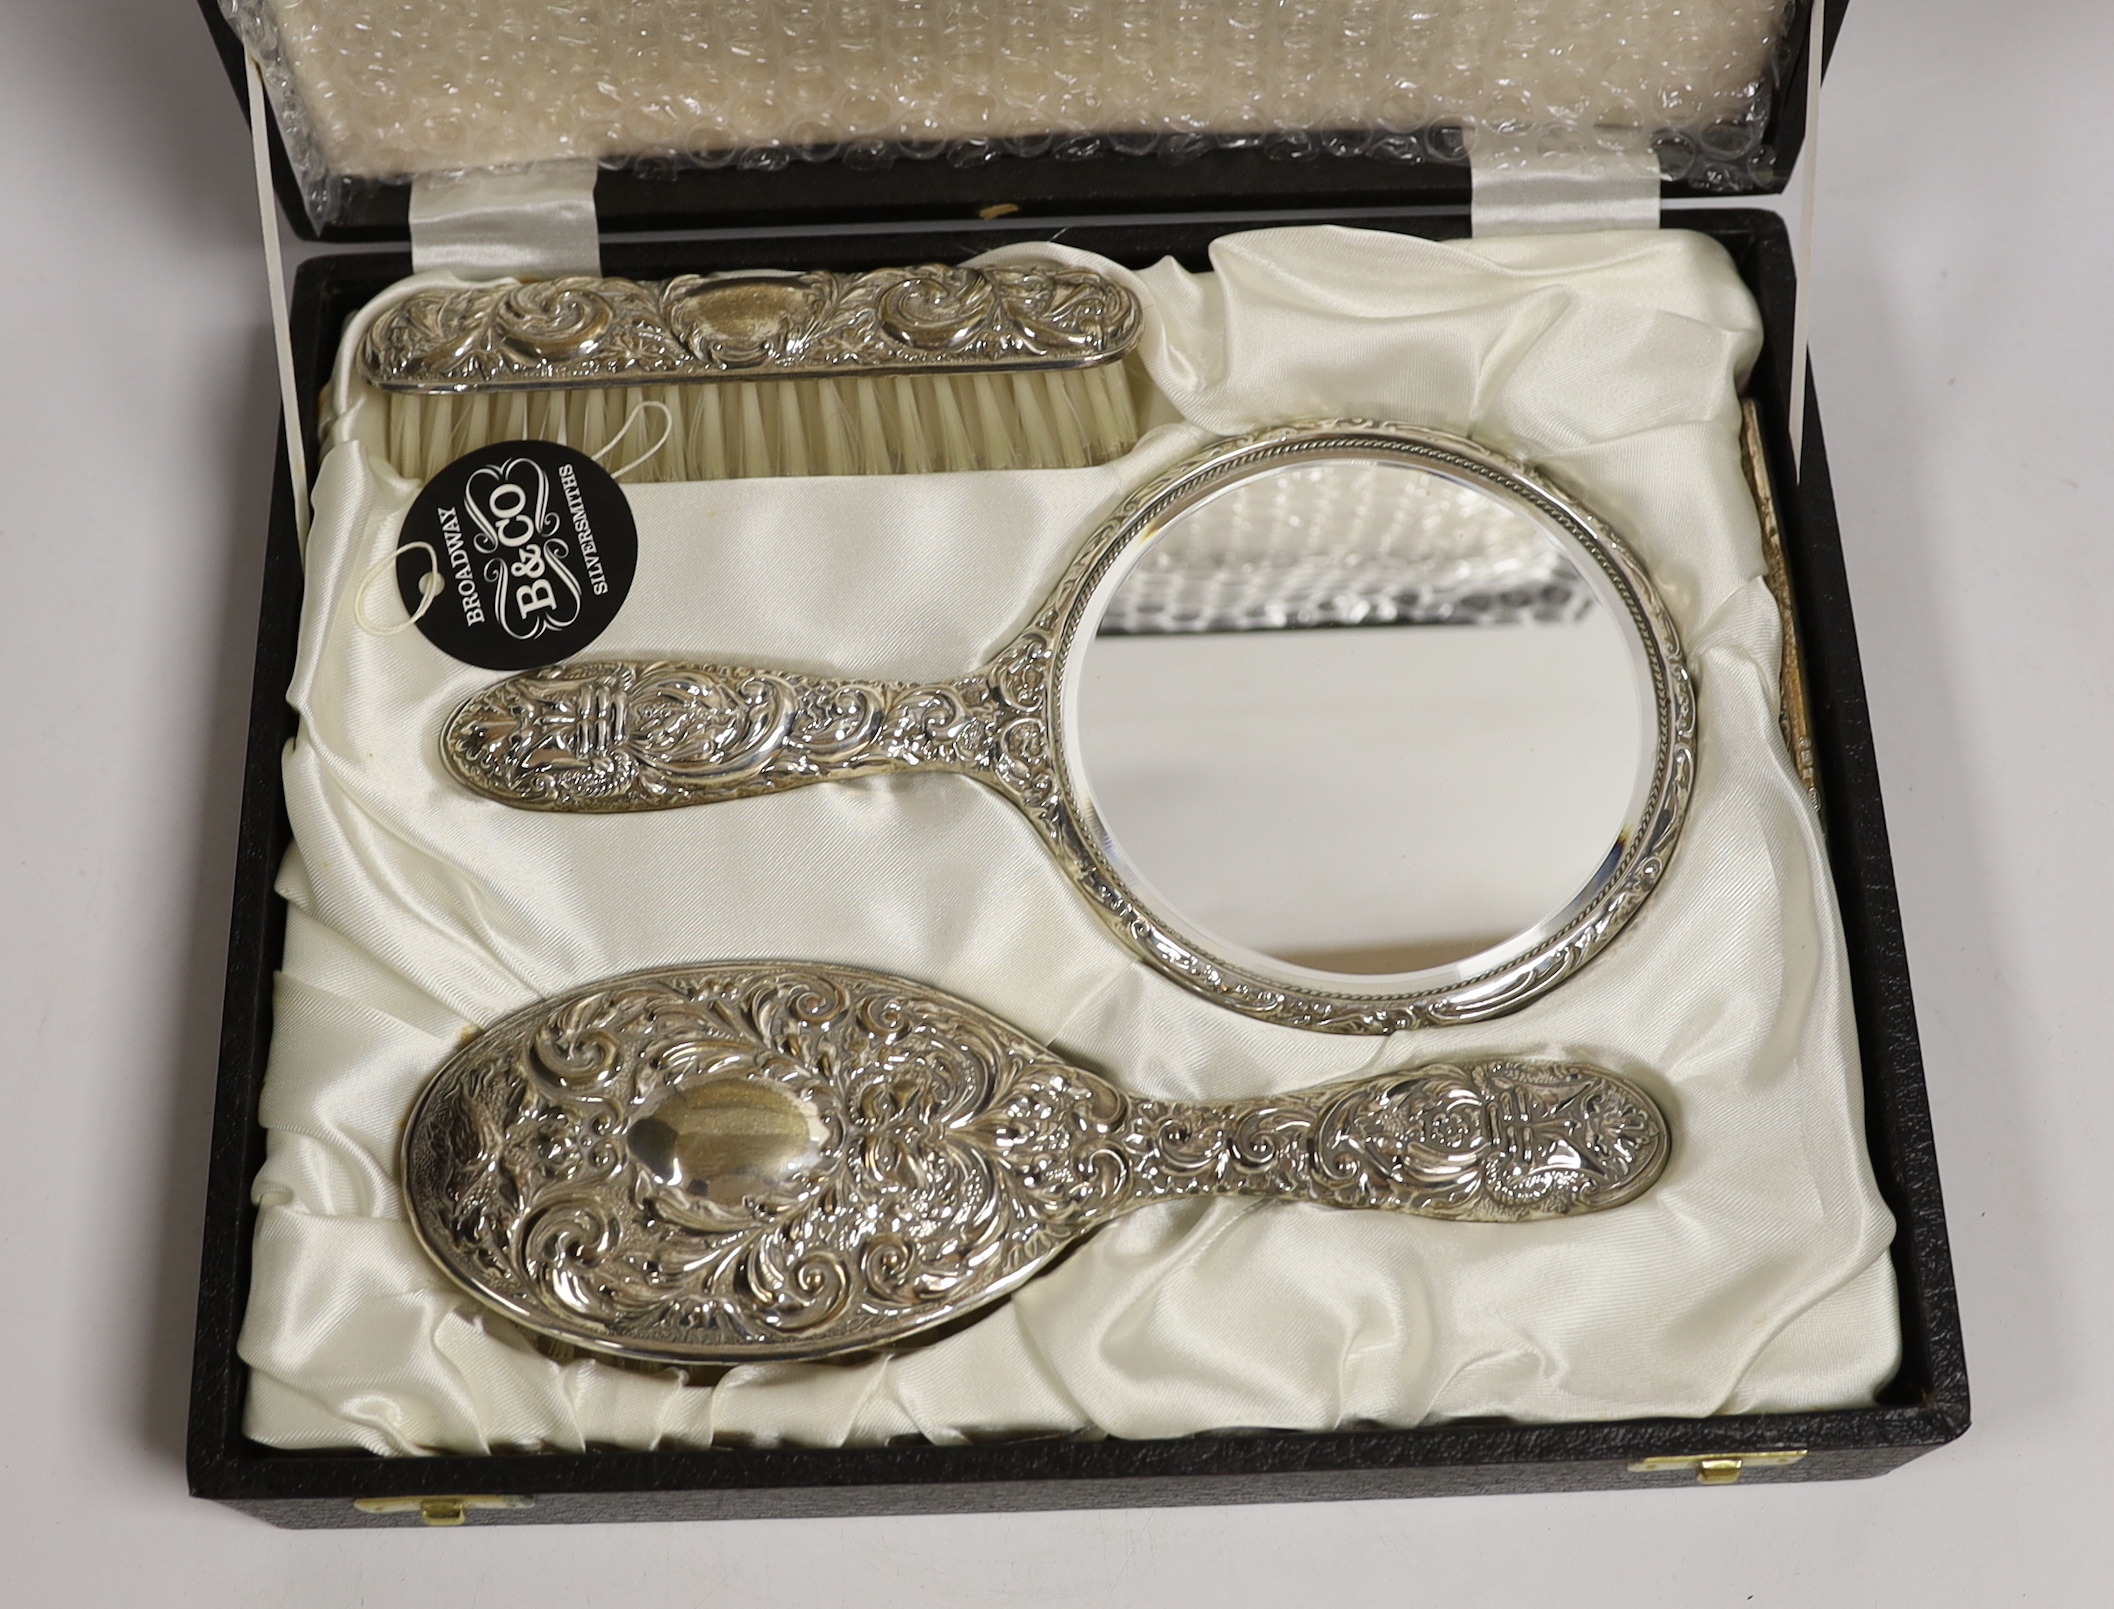 A cased modern silver mounted four piece mirror and brush set, Birmingham, 1985.